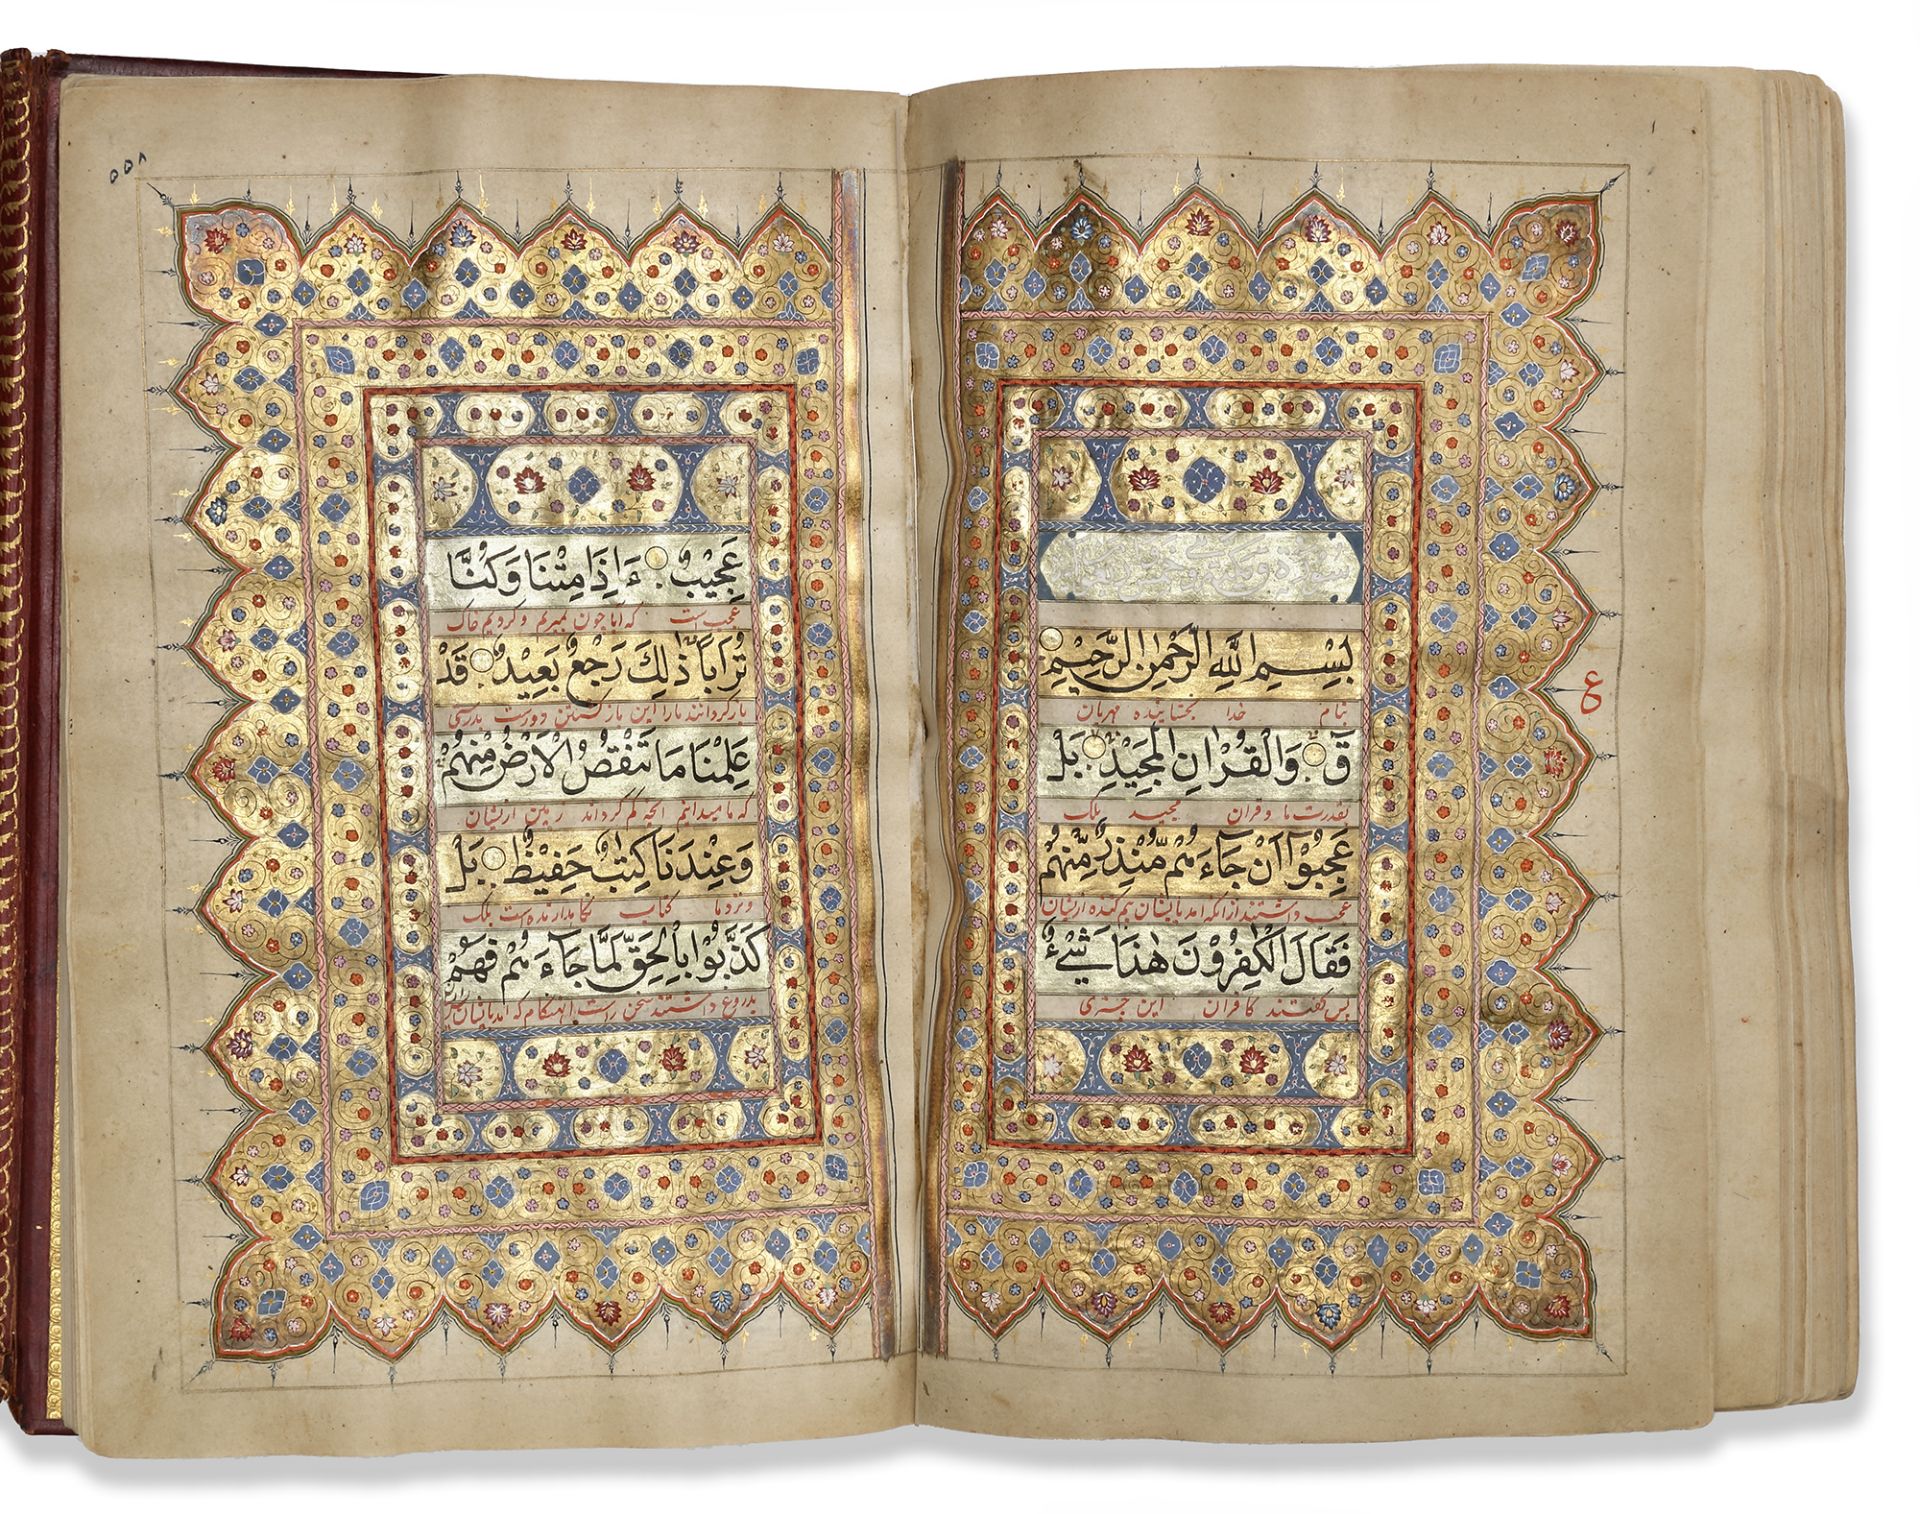 A FINELY ILLUMINATED QURAN, CENTRAL ASIA, 18TH CENTURY - Image 5 of 8